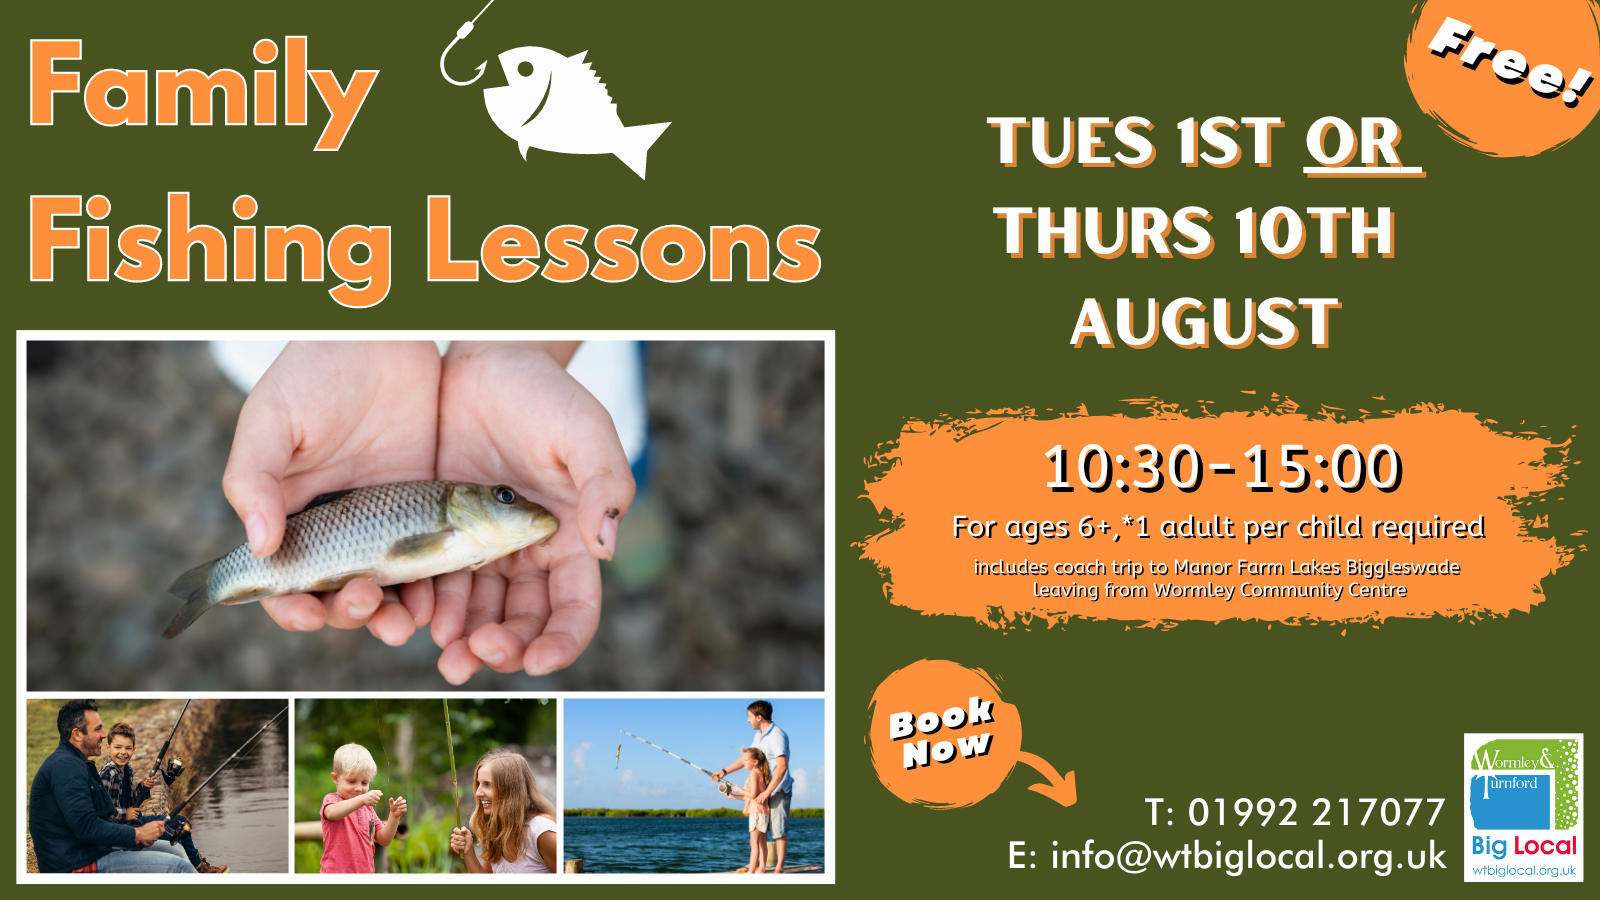 FREE Family Fishing Lessons